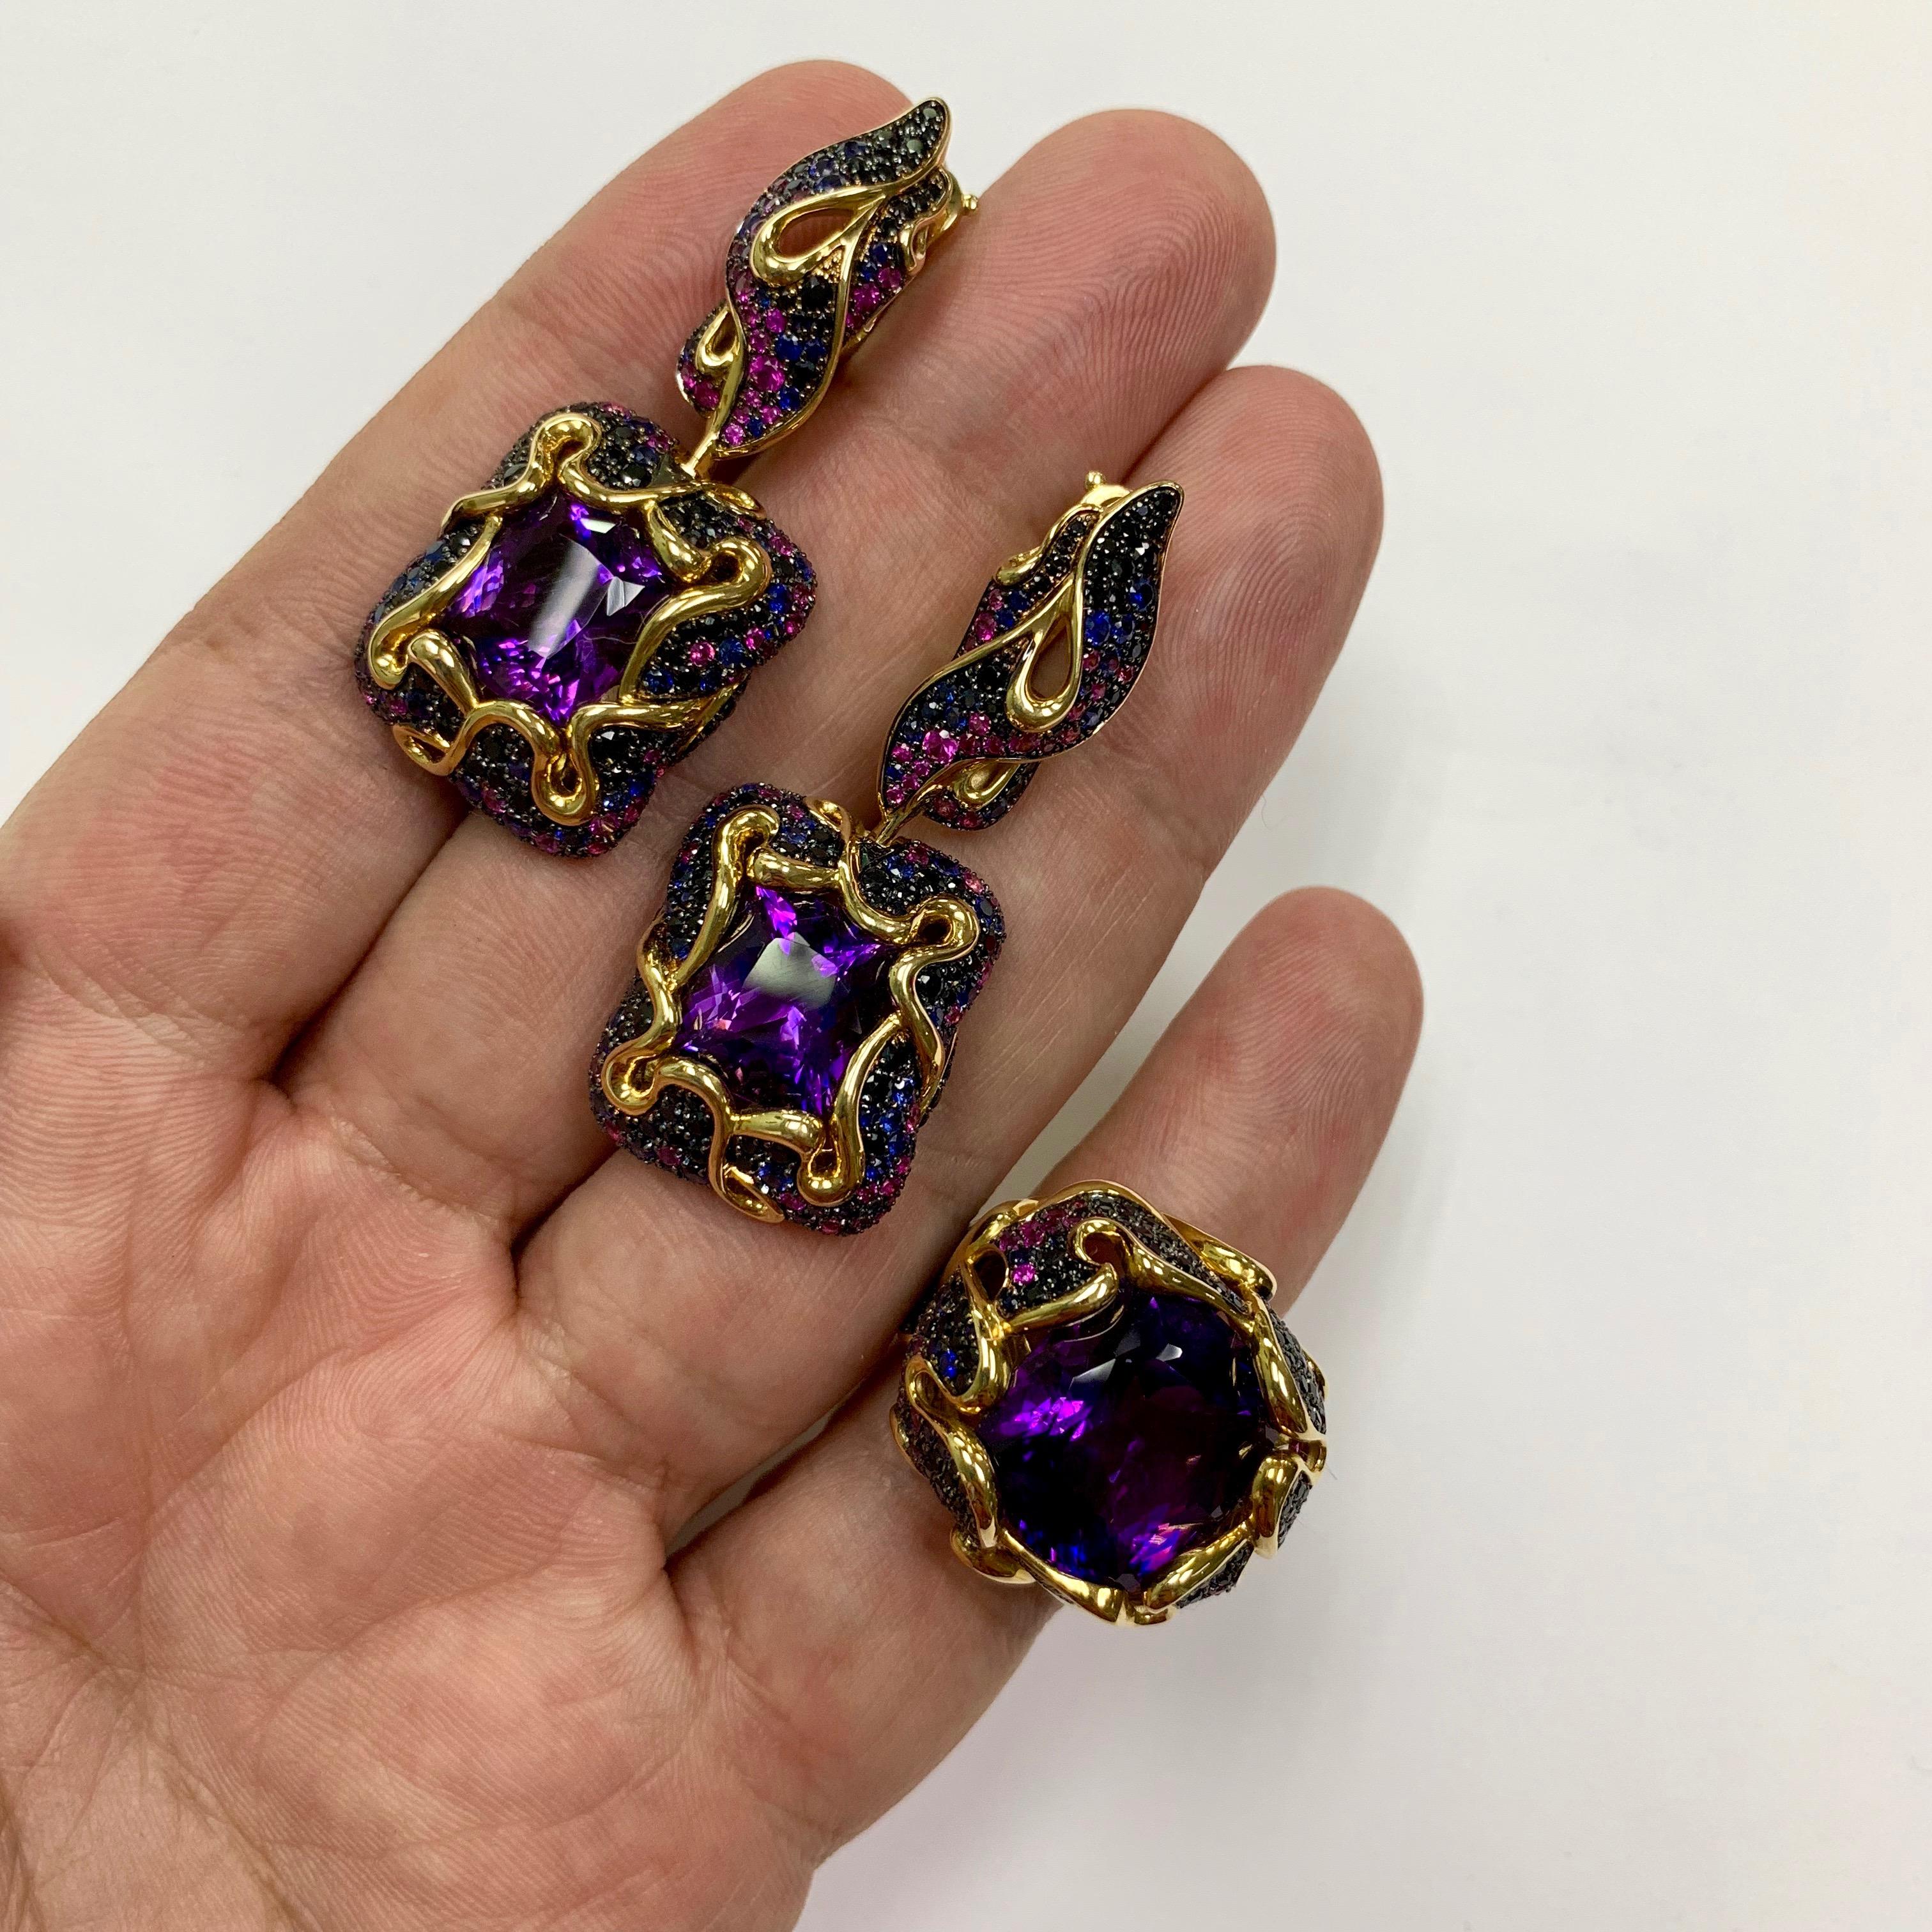 Amethyst Pink Blue Black Sapphire 18 Karat Yellow Gold Ring Earrings Suite
In early June in the gardens bloom luxurious flowers - peonies. Romance and mystery of peonies always attracted and allured artists. Our designers created this Suite,